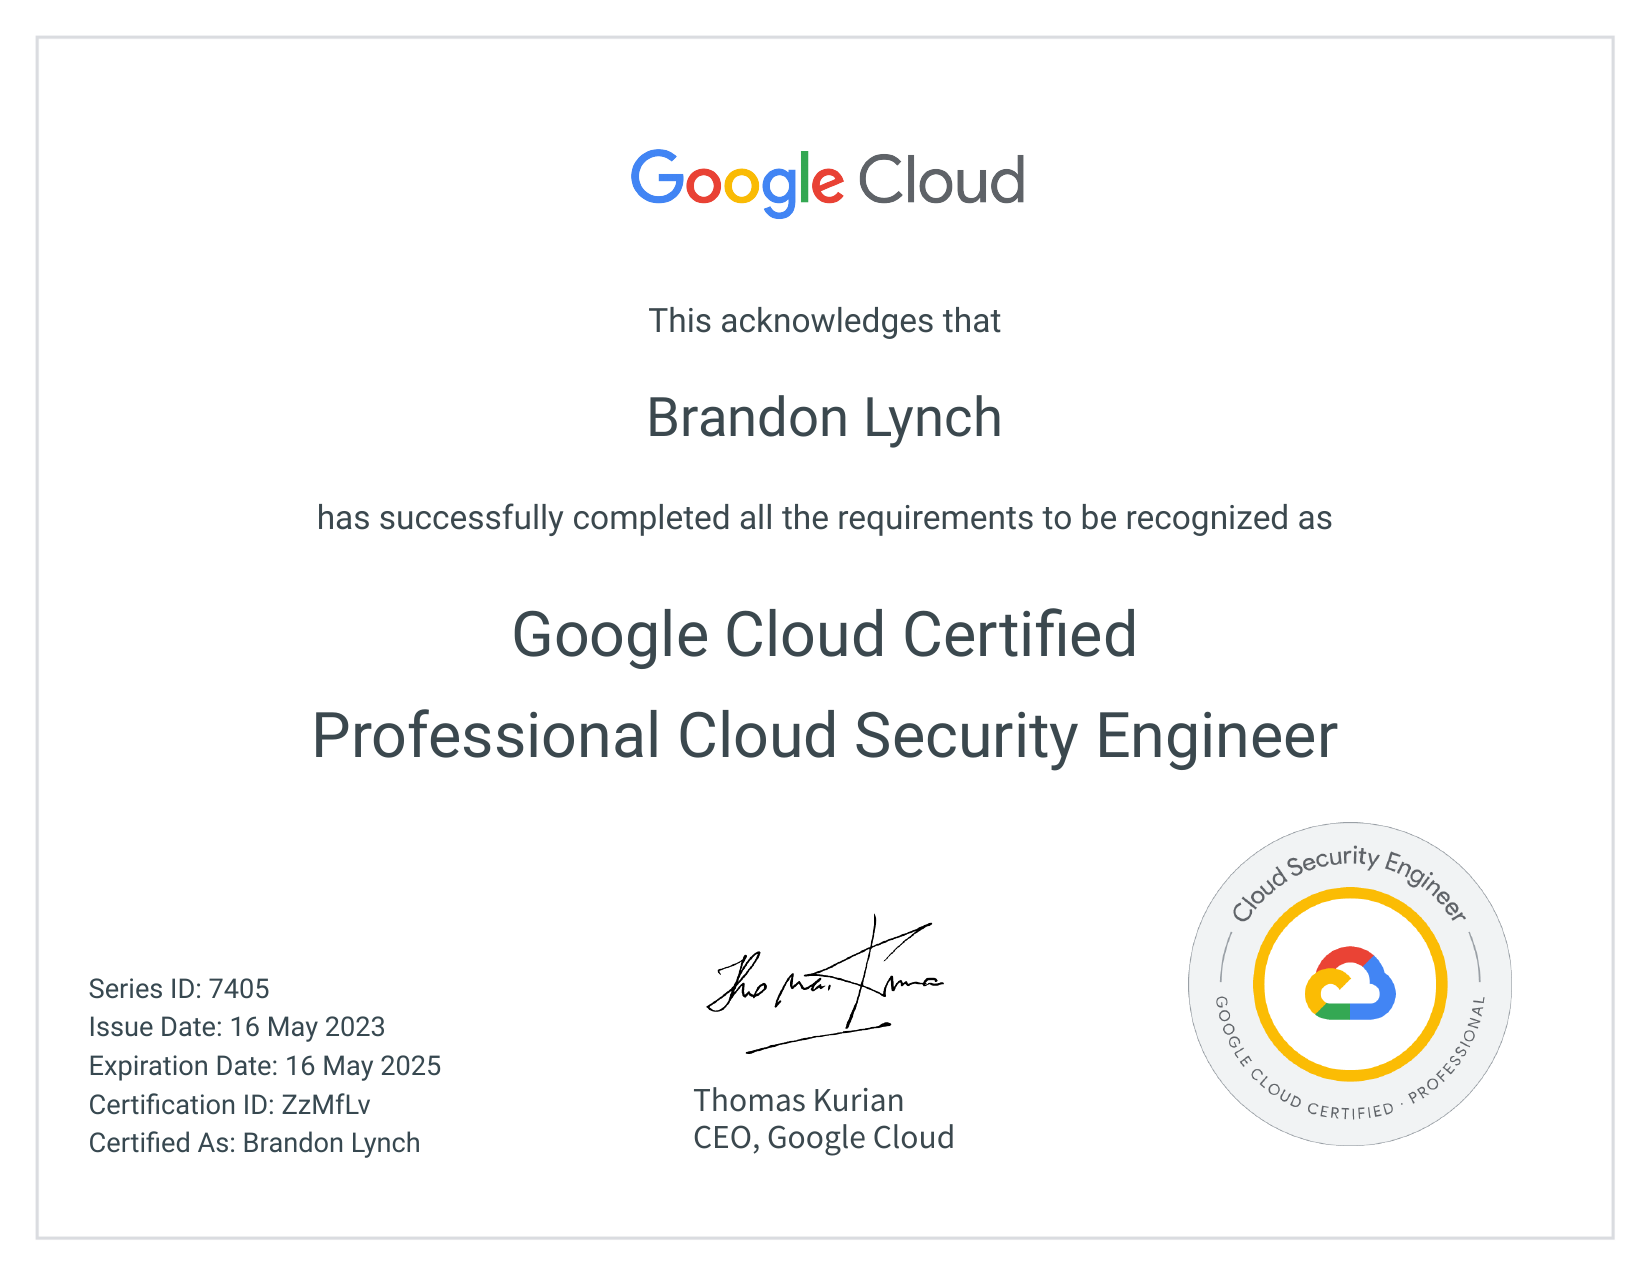 Professional Cloud Security Engineer Certification